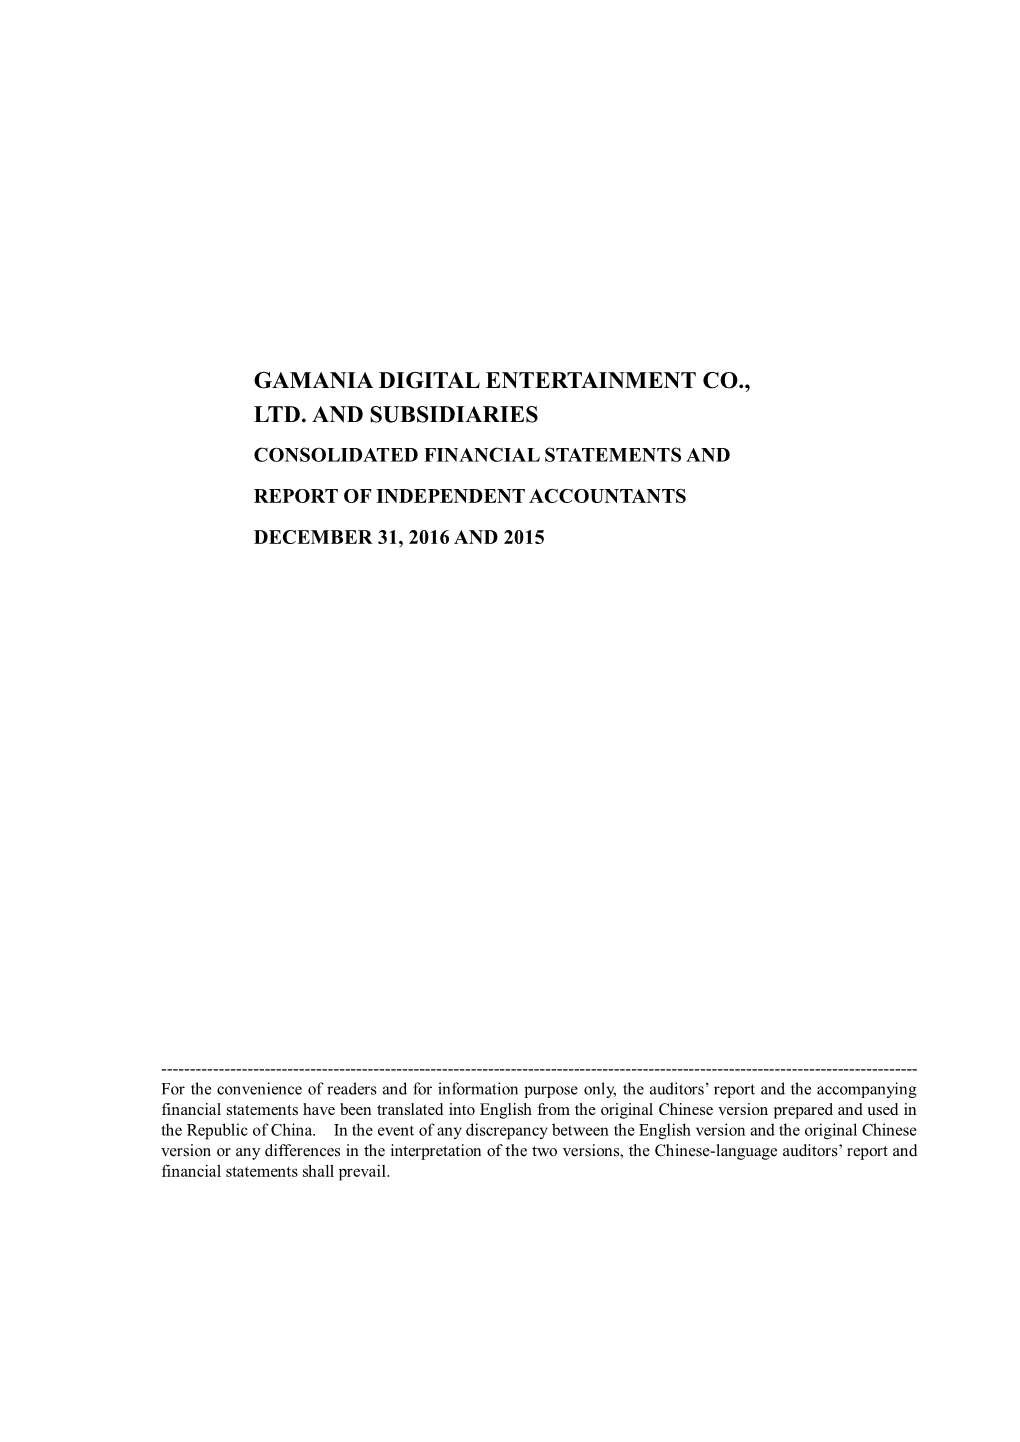 Gamania Digital Entertainment Co., Ltd. and Subsidiaries Consolidated Financial Statements And